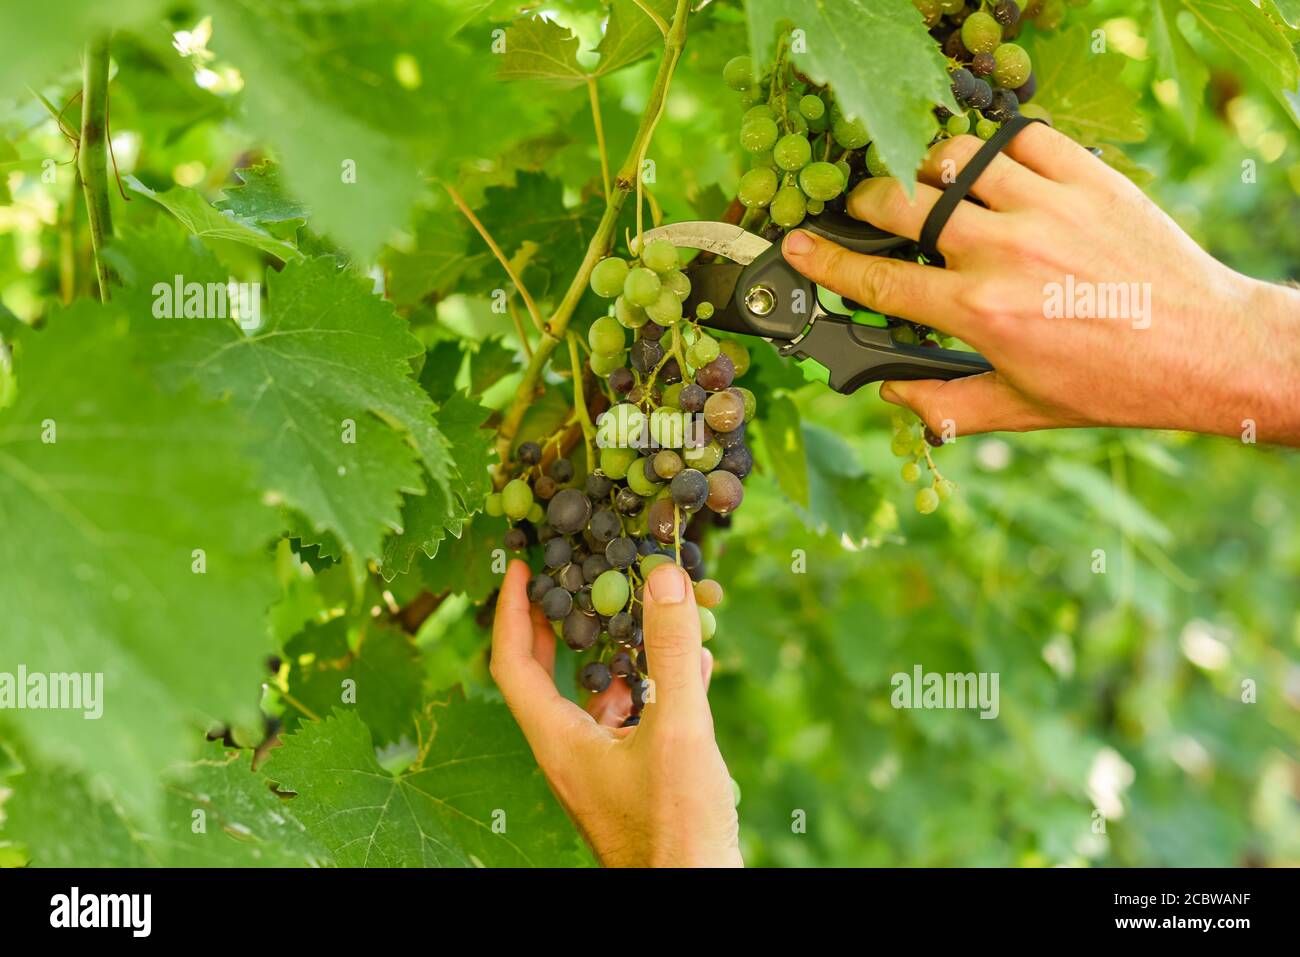 Male hand holding and cutting the grape cluster with garden scissors showing the semi ripened bunch of juicy and delicious black grapes Stock Photo